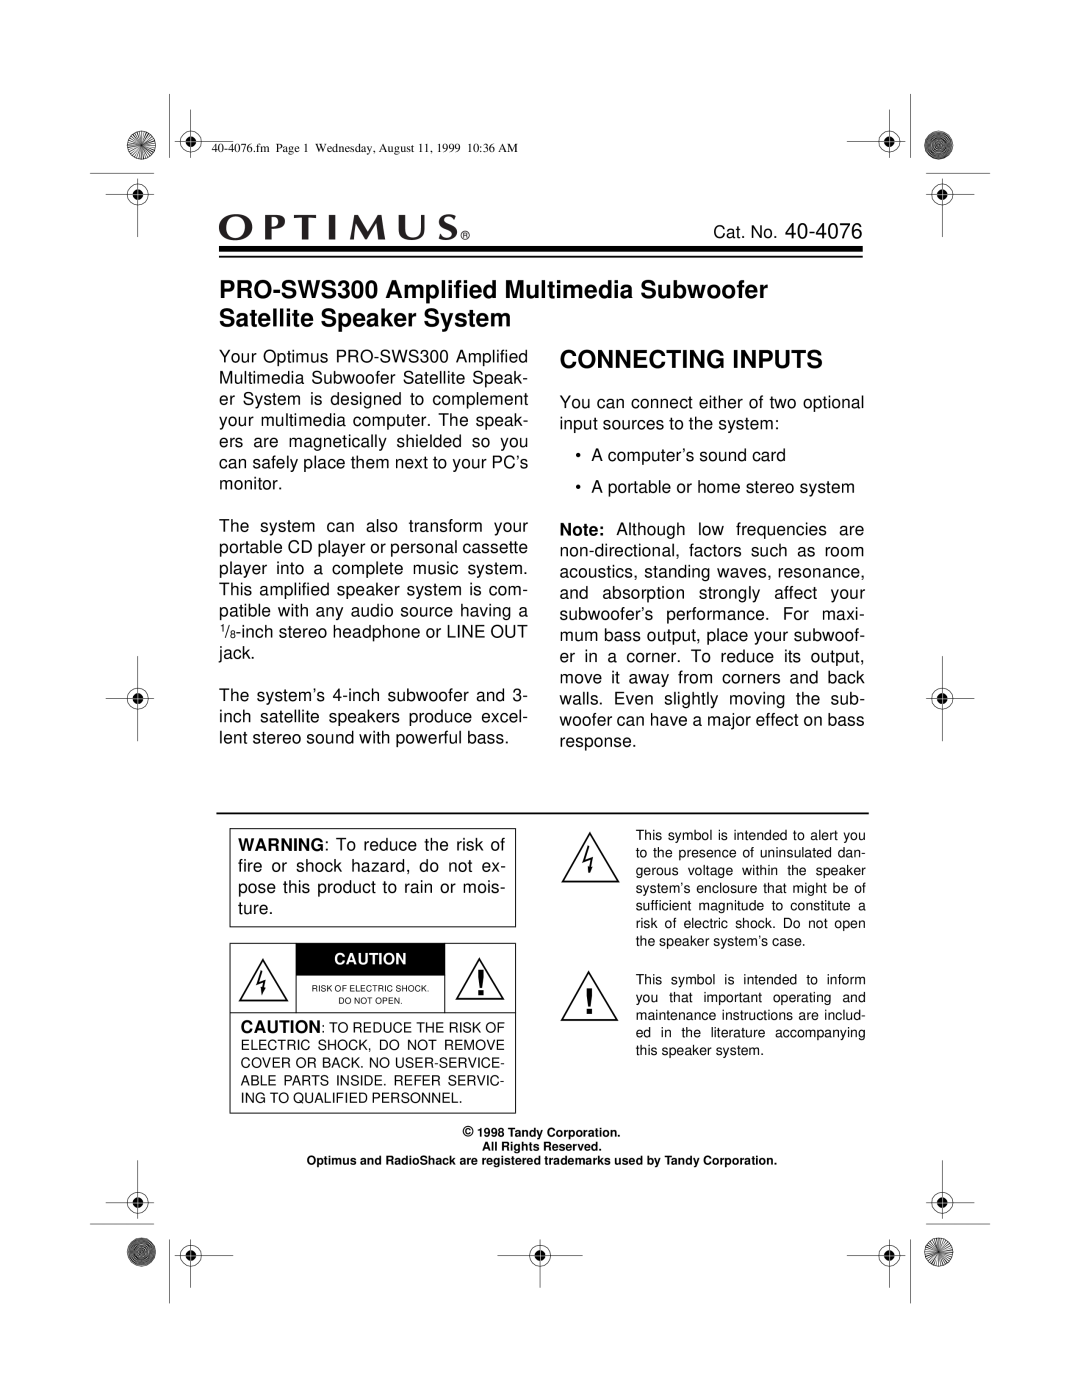 Optimus PRO-SWS300 user service Connecting Inputs 